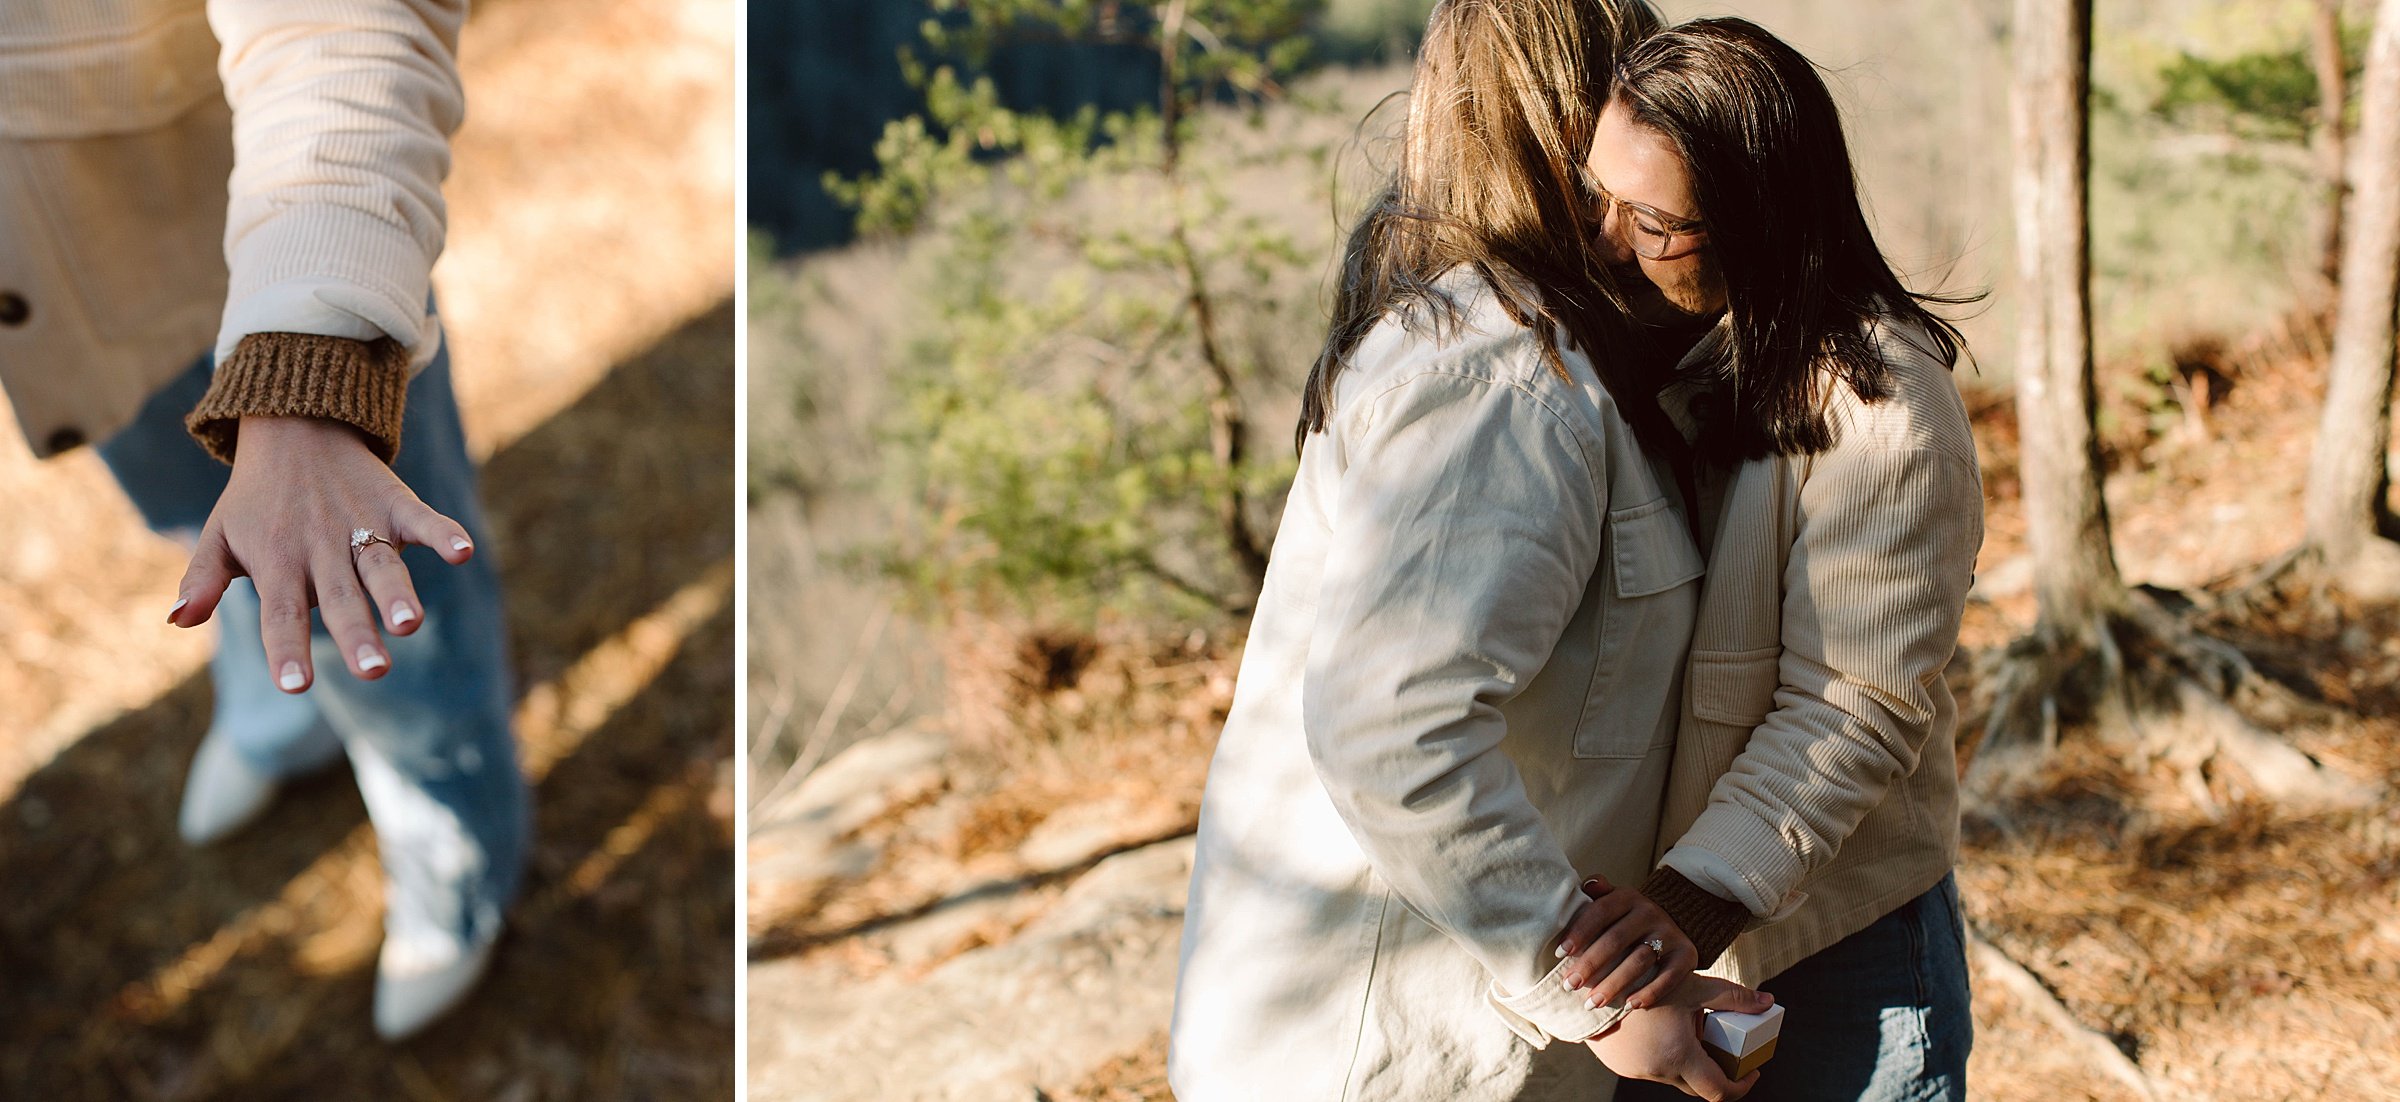 Late Autumn Proposal & Engagement Session in Red River Gorge- Kentucky046.jpg